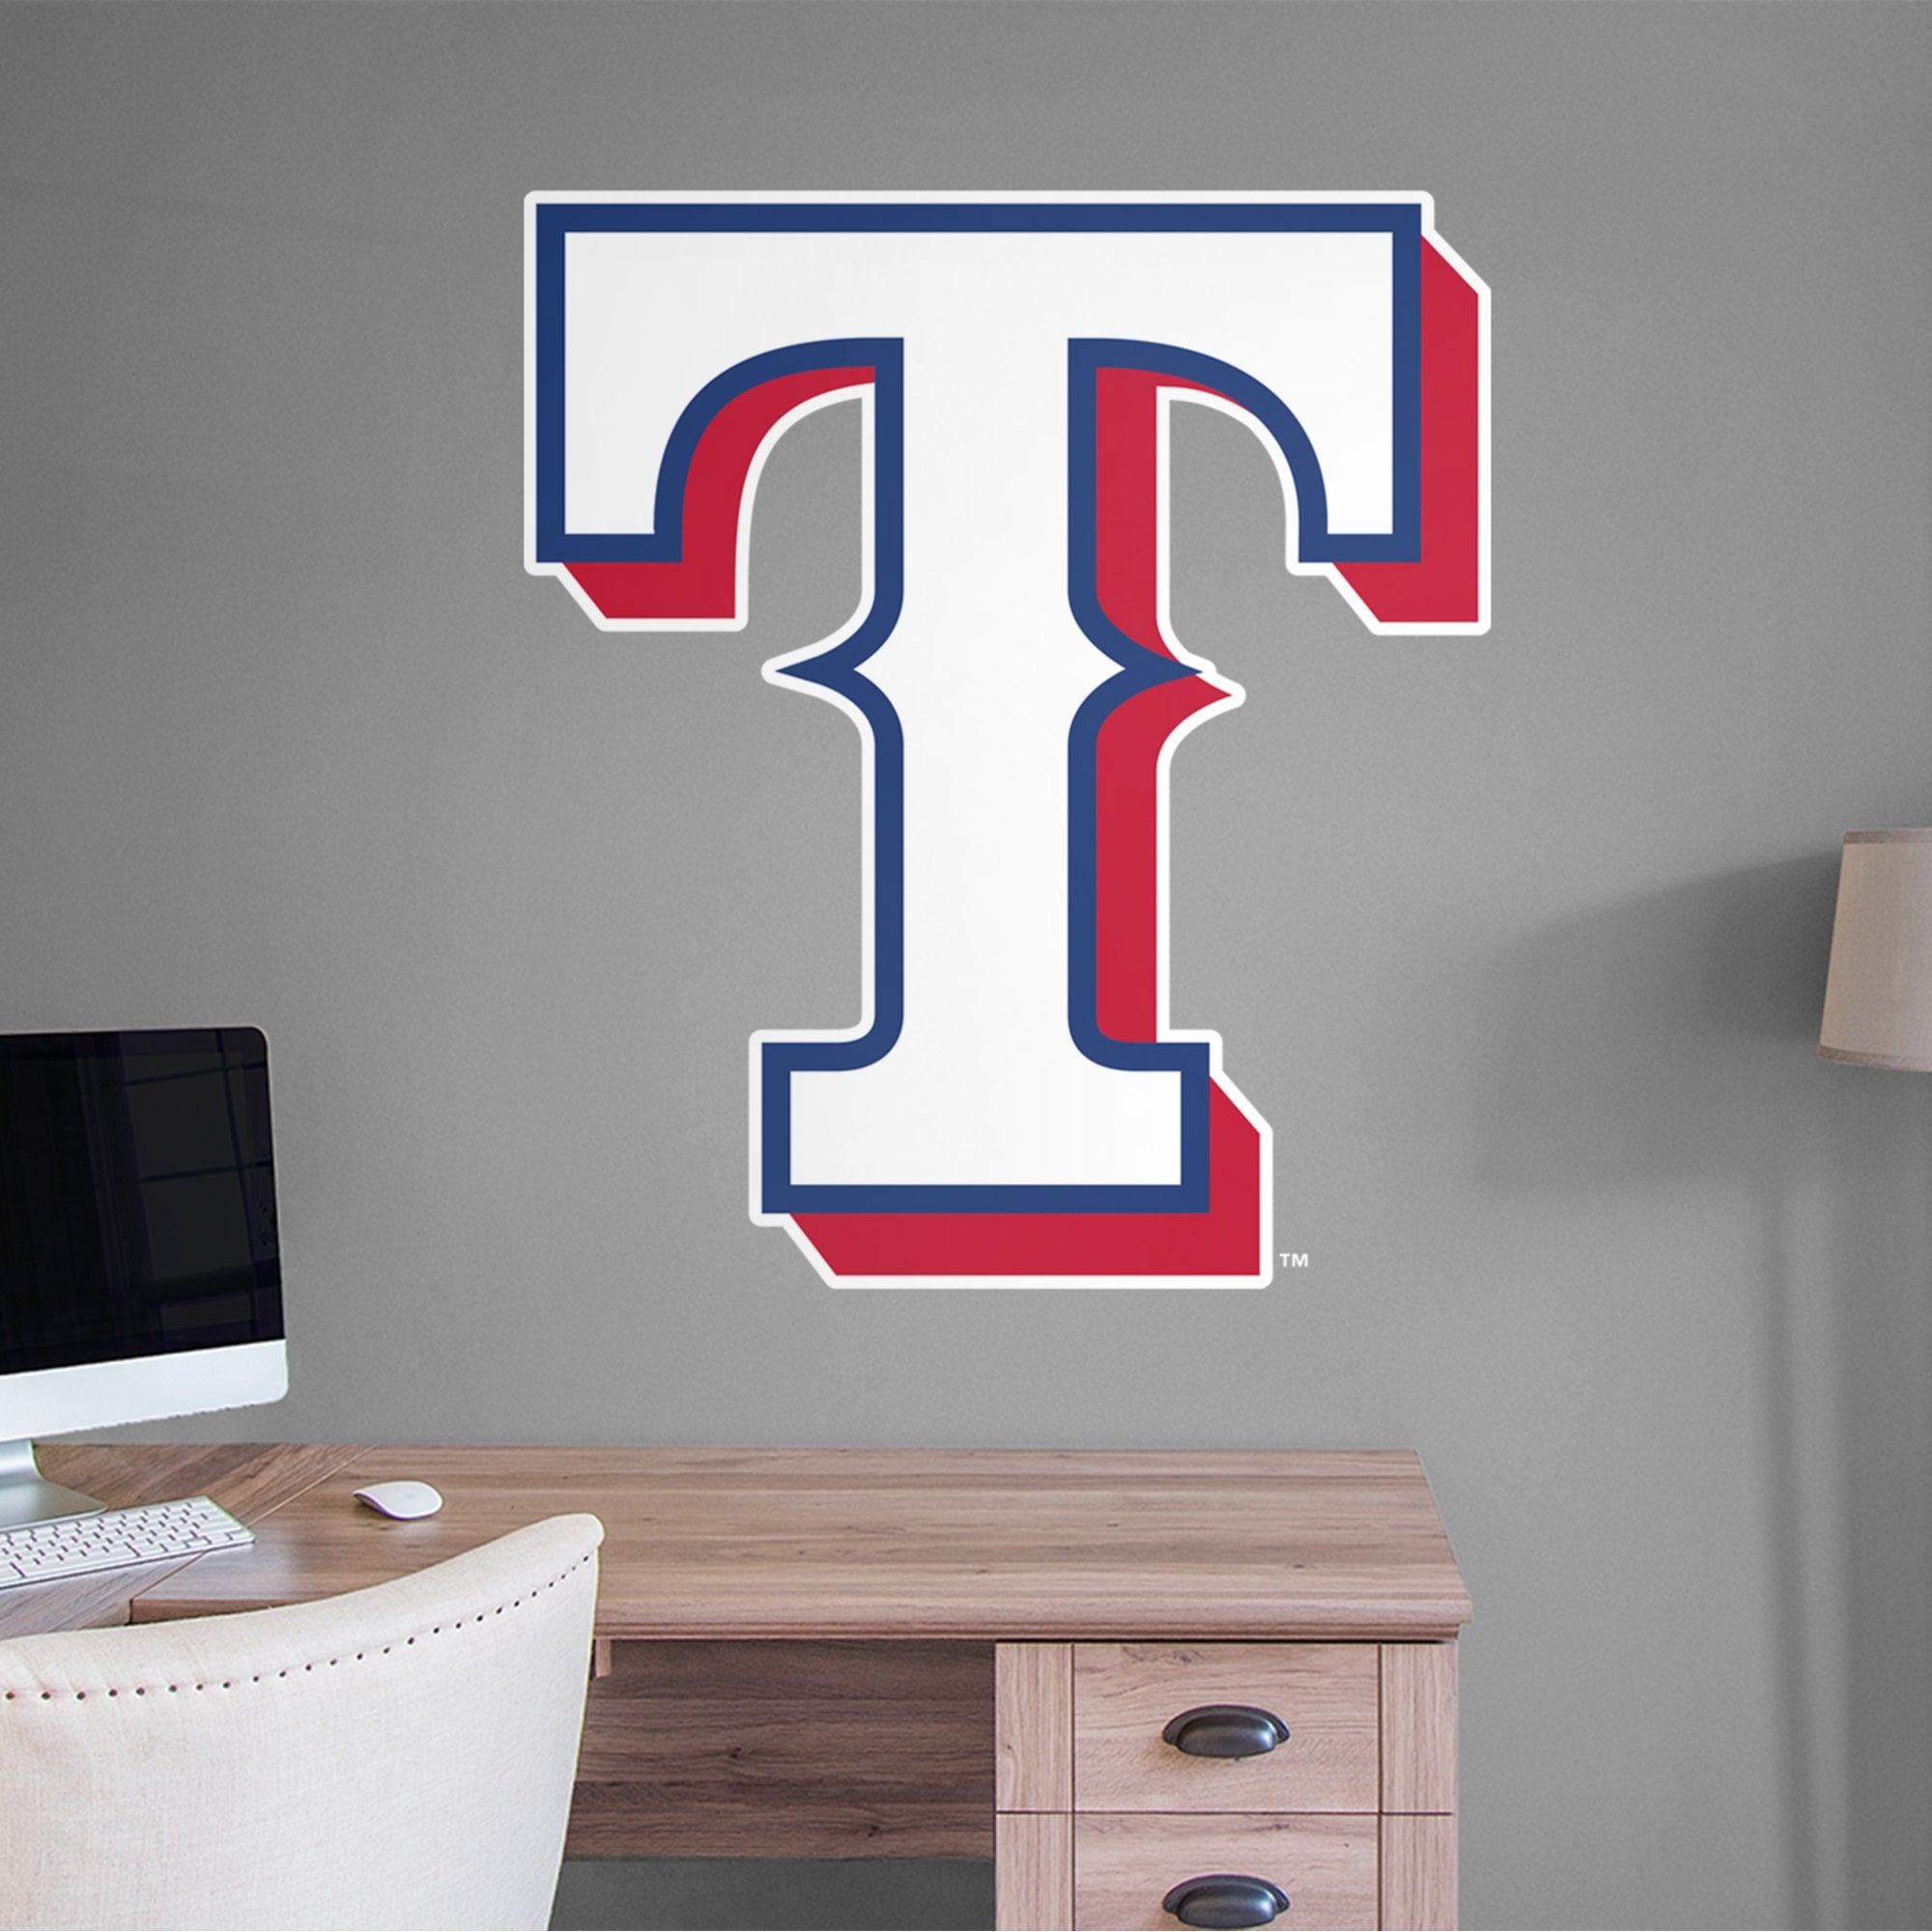 Texas Rangers: Alternate Logo - Officially Licensed MLB Removable Wall Decal 38.5"W x 44.0"H by Fathead | Vinyl